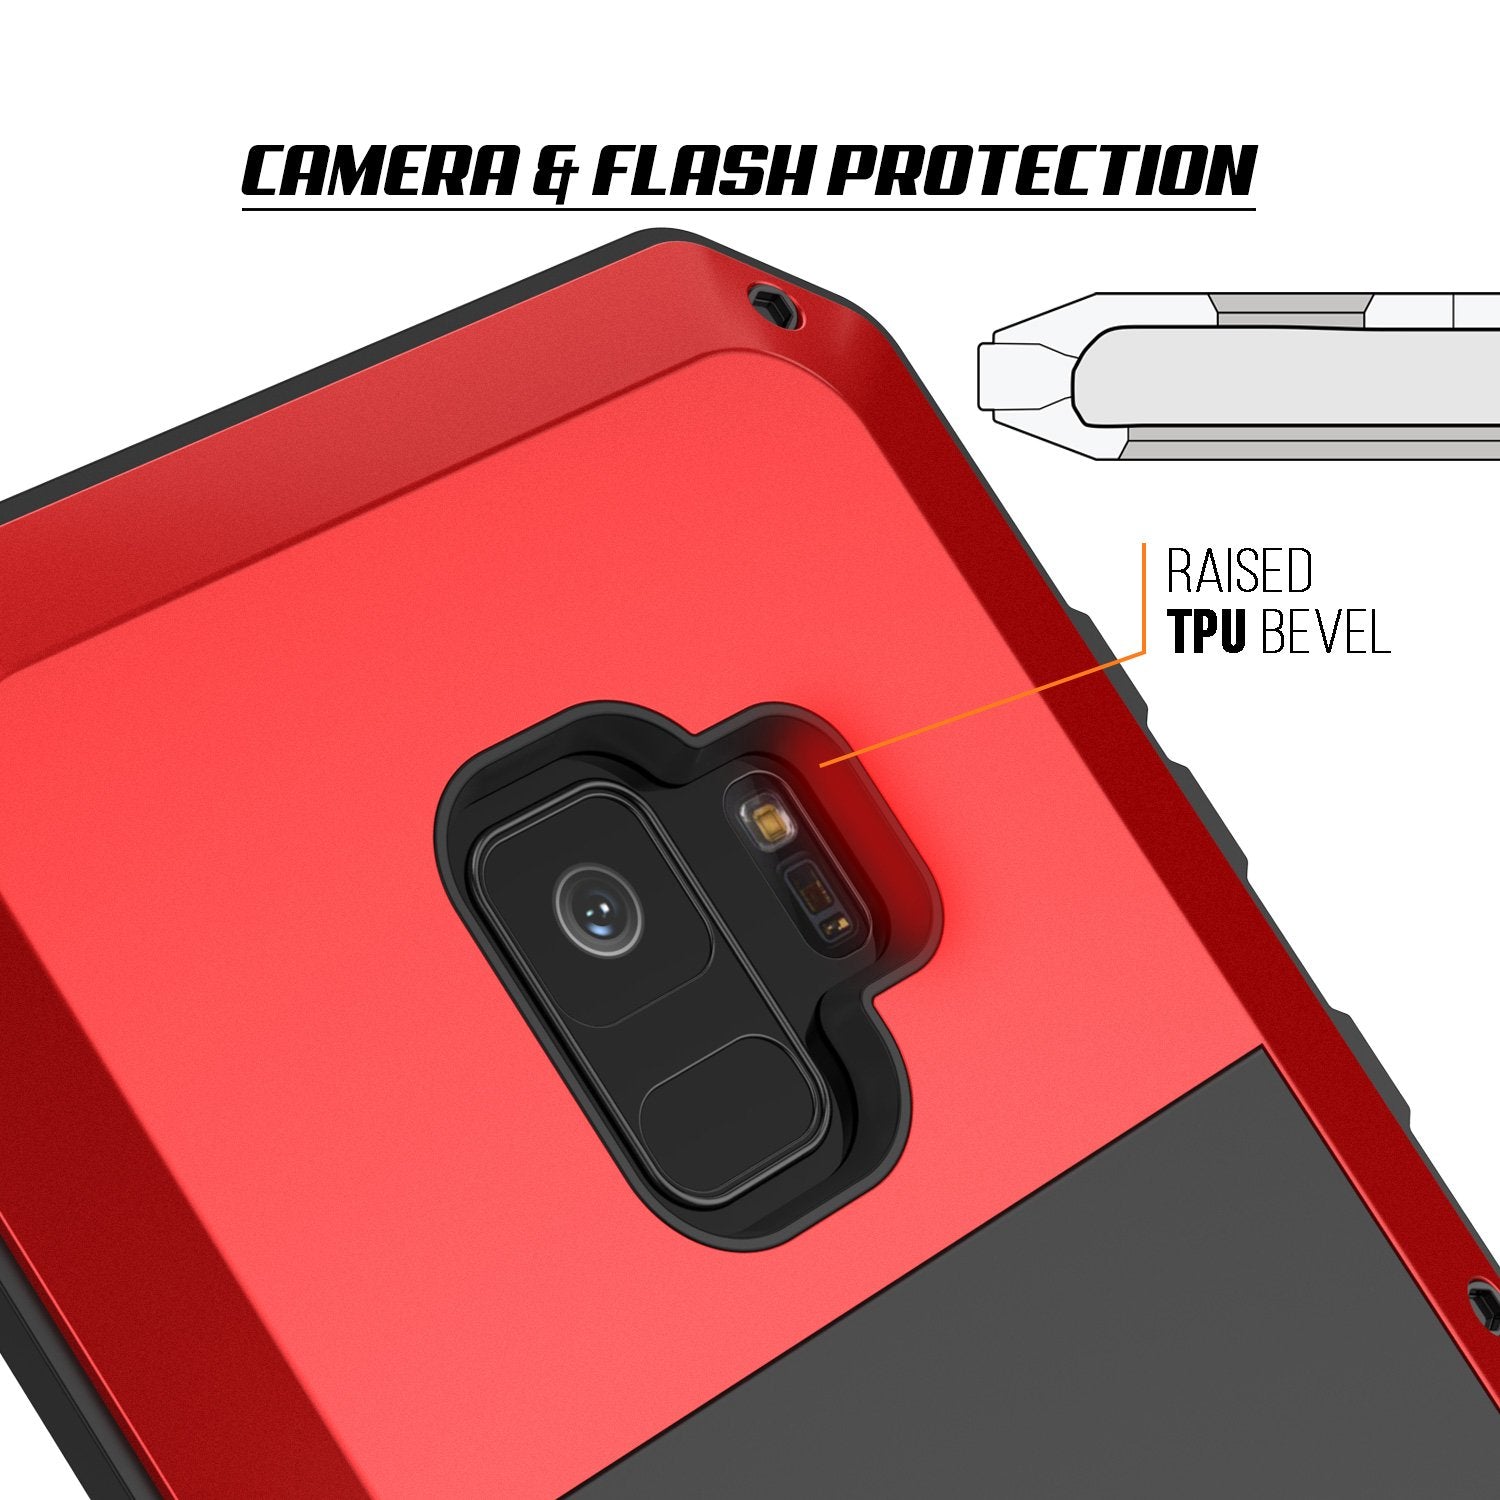 Galaxy S9 Metal Case, Heavy Duty Military Grade Rugged Armor Cover [shock proof] Hybrid Full Body Hard Aluminum & TPU Design [non slip] W/ Prime Drop Protection for Samsung Galaxy S9 [Red]